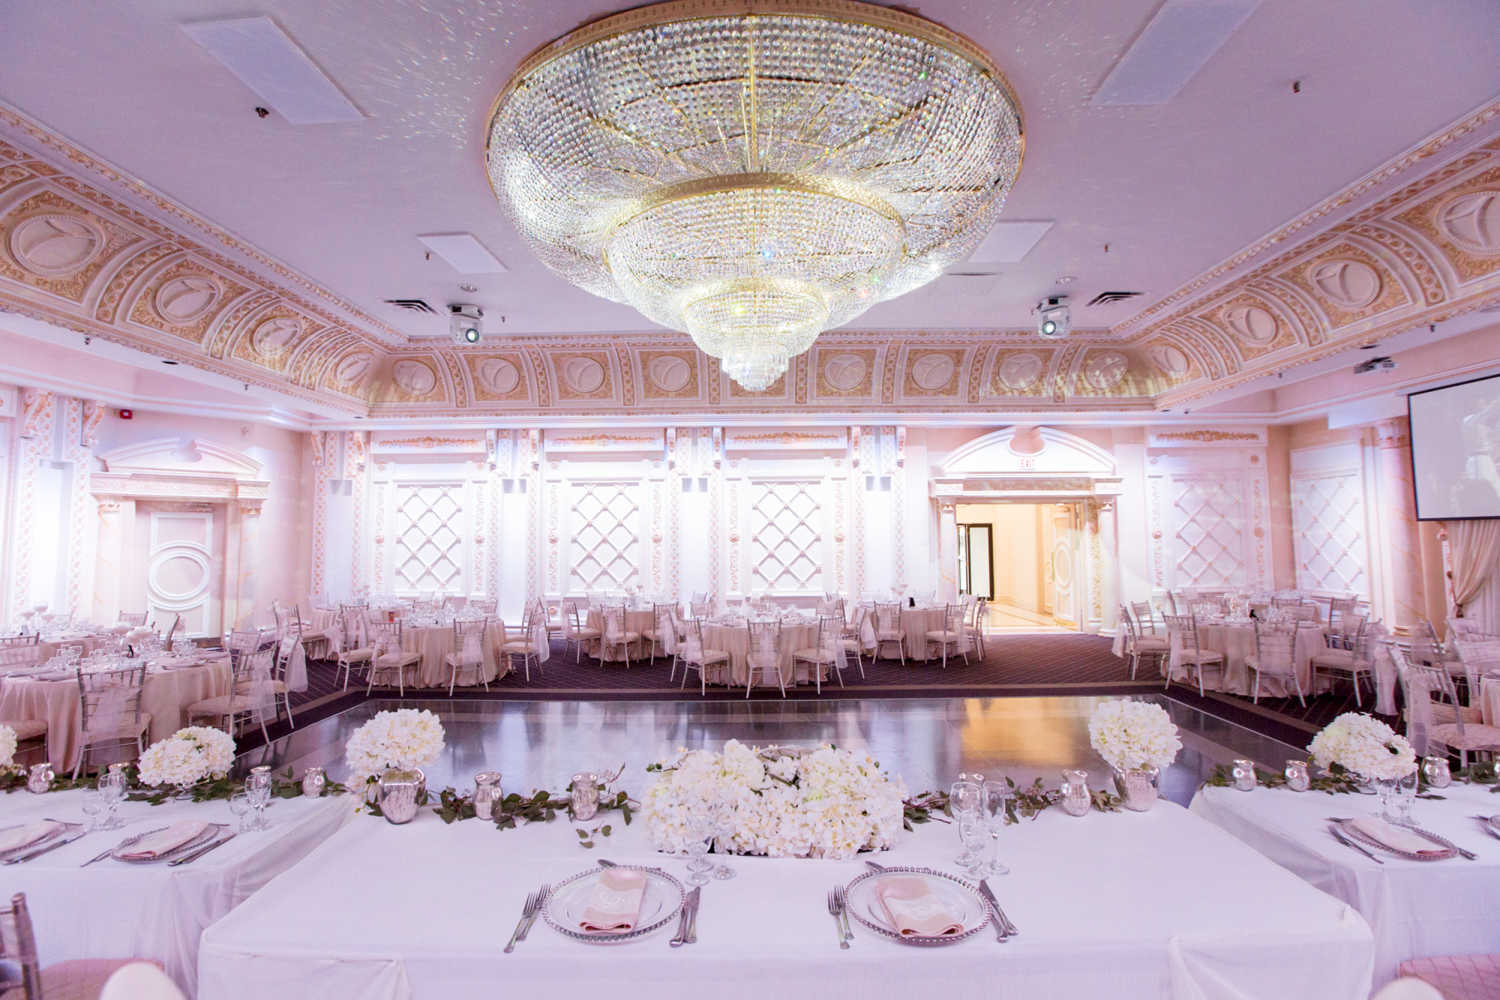 The Queen Victoria Wedding venue at paradise banquet halls with table settings, a large dance floor and a giant chandelier.